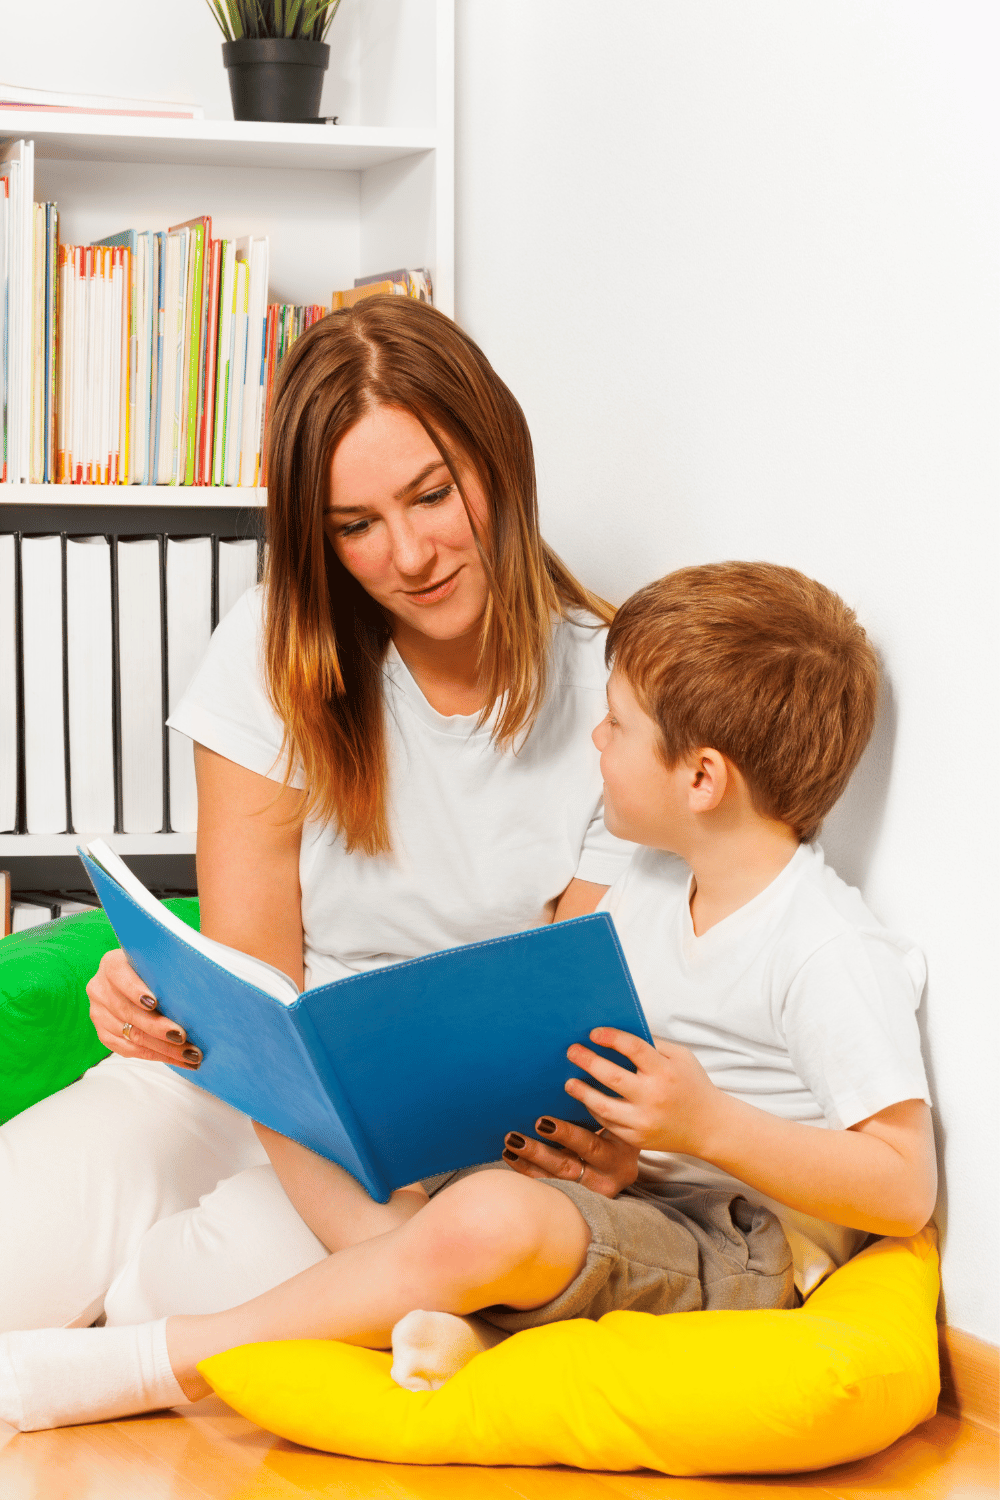 Why Parents Should Read To Their Children